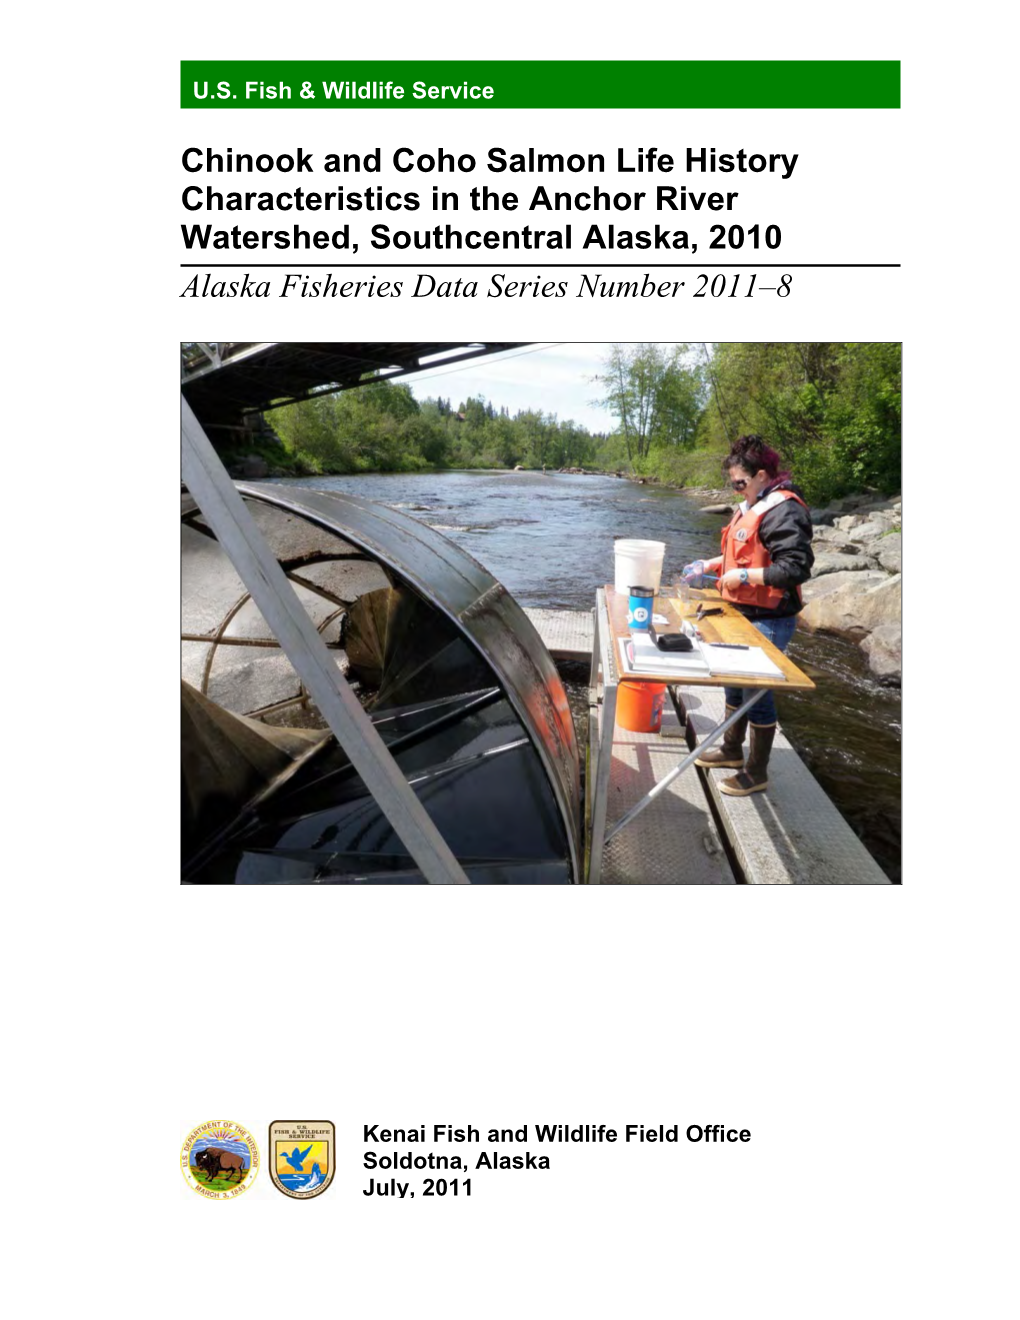 Chinook and Coho Salmon Life History Characteristics in the Anchor River Watershed, Southcentral Alaska, 2010 Alaska Fisheries Data Series Number 2011–8